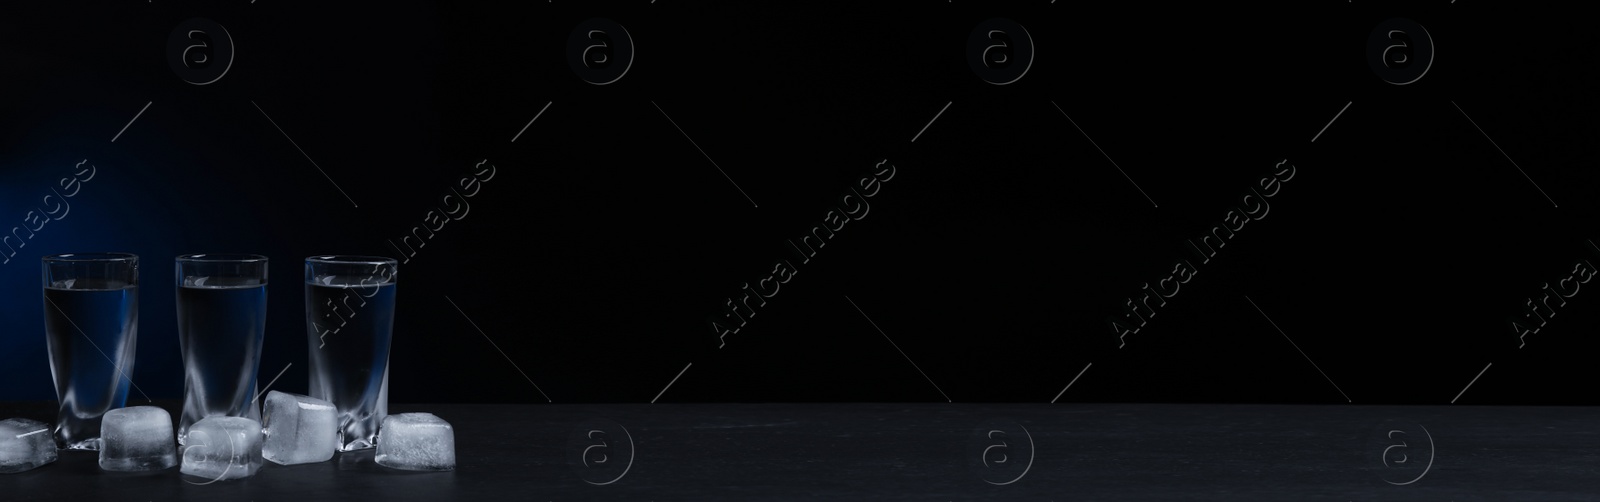 Image of Shot glasses of vodka with ice cubes on black table against dark background, space for text. Banner design